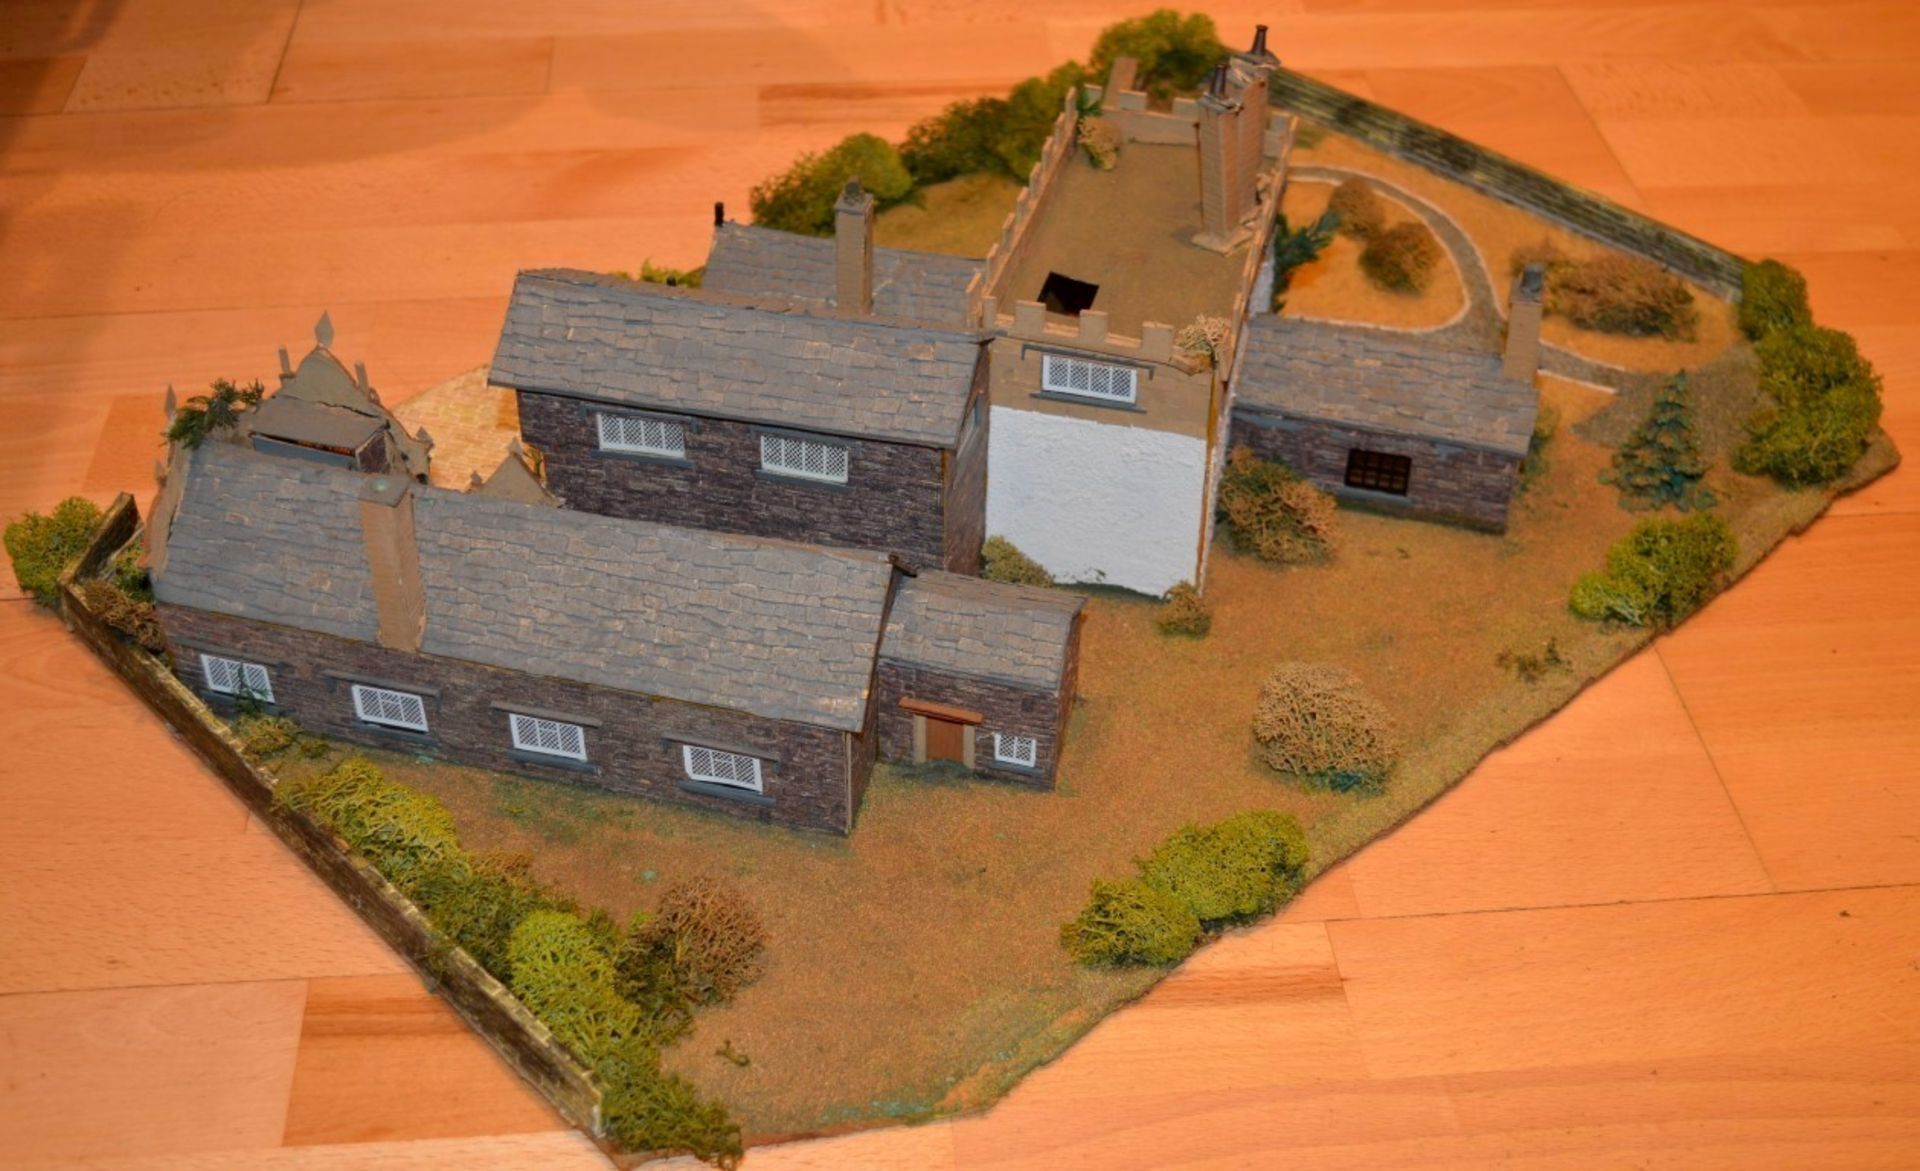 1 x Vintage 00 Gauge Train Model Railway Diorama Building - Depicting Stunning Country House Set - Image 9 of 31